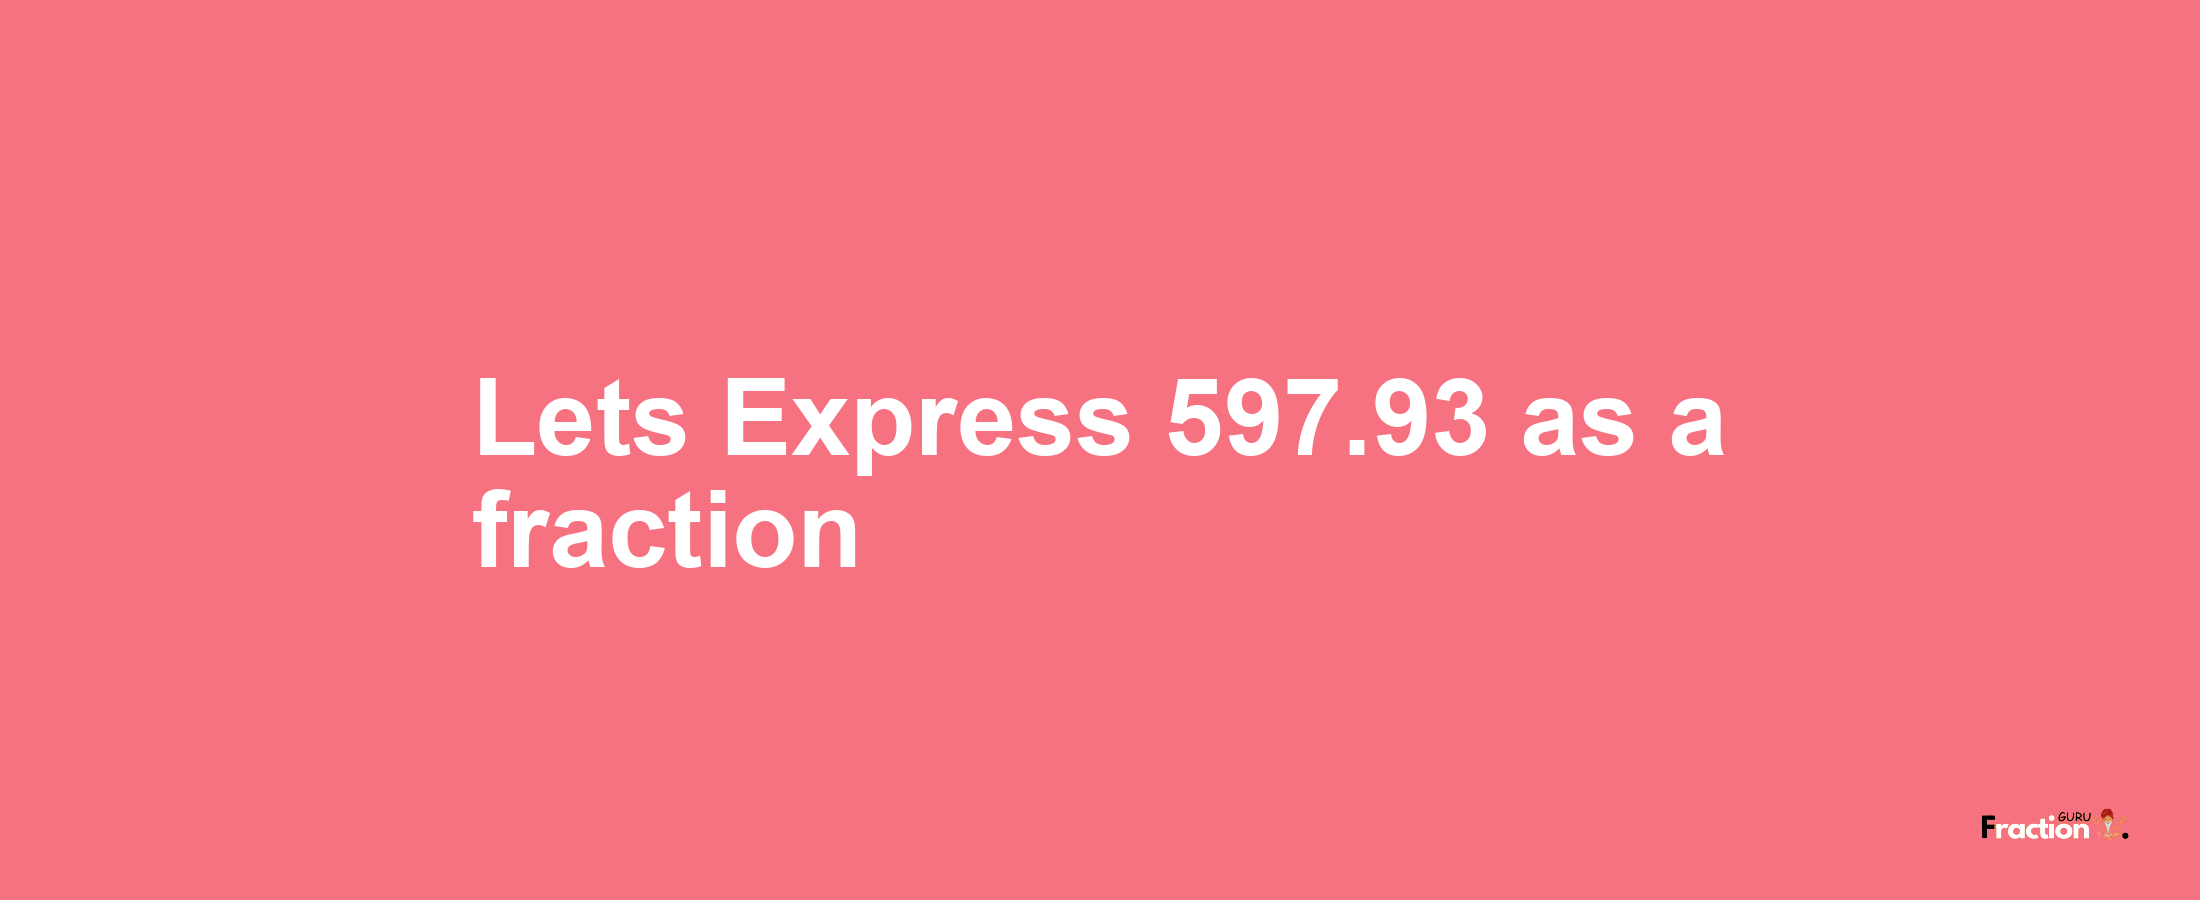 Lets Express 597.93 as afraction